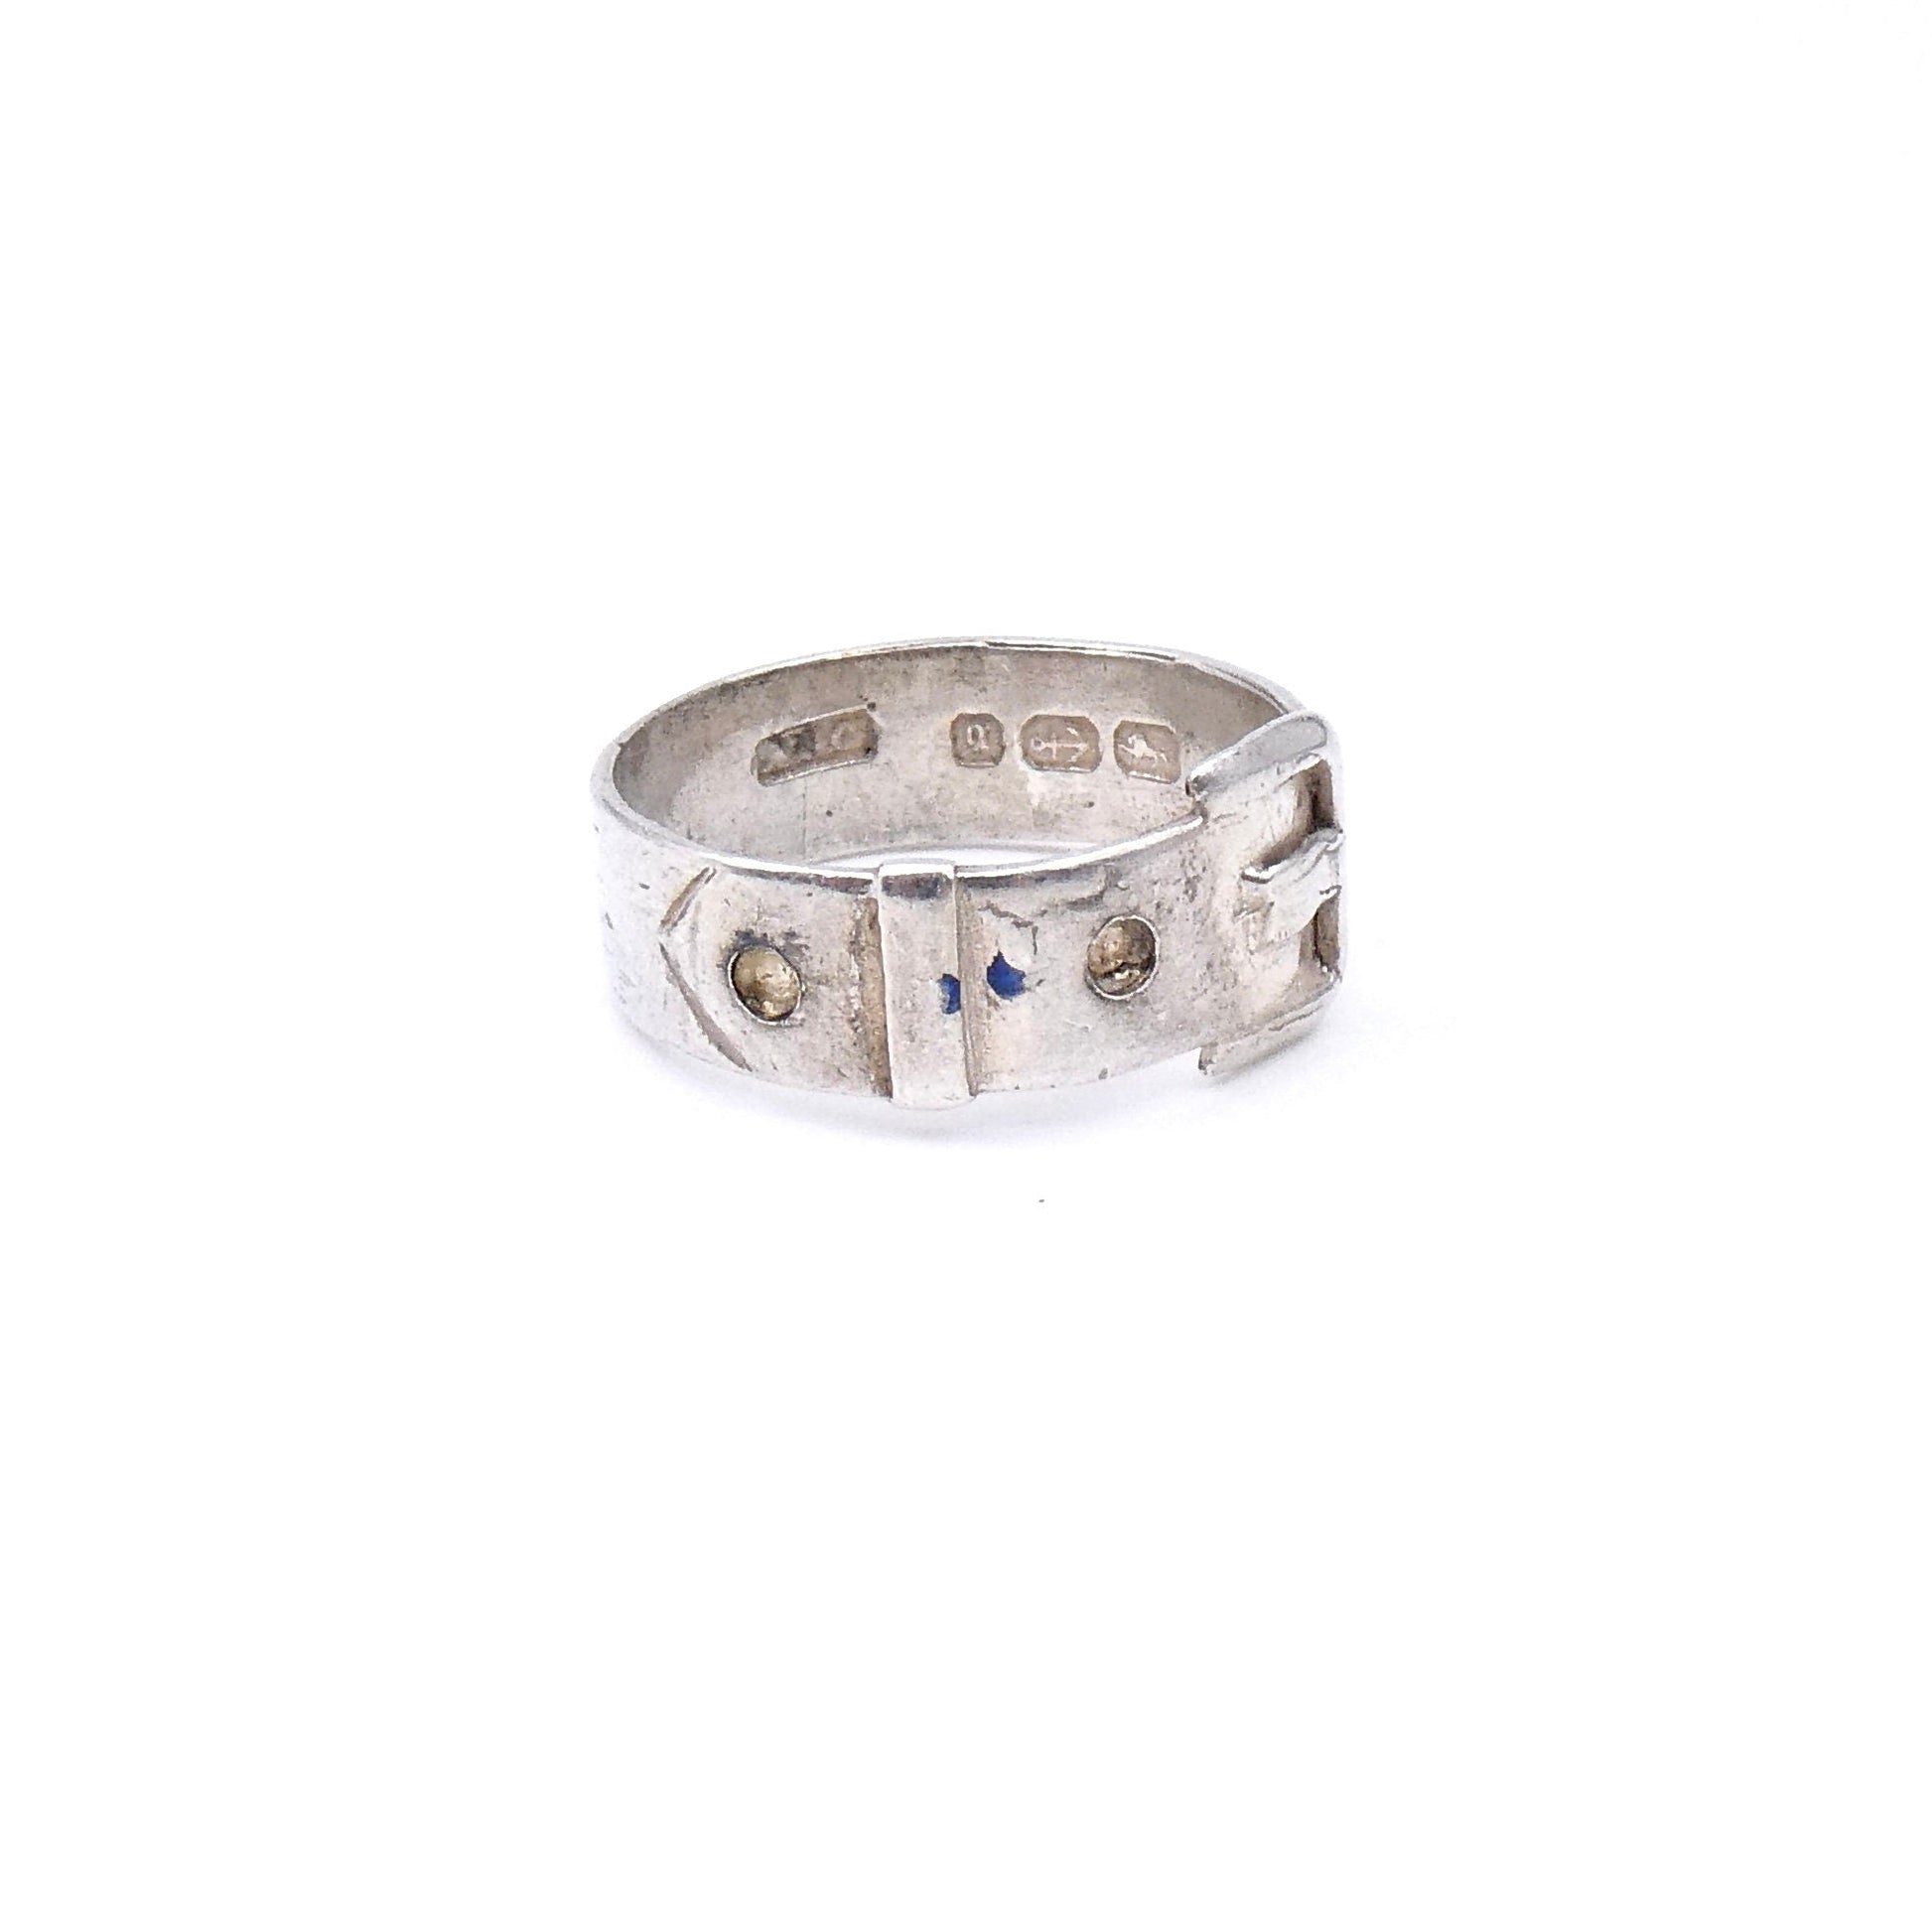 Antique silver buckle ring from 1881, a genuine antique treasure. - Collected